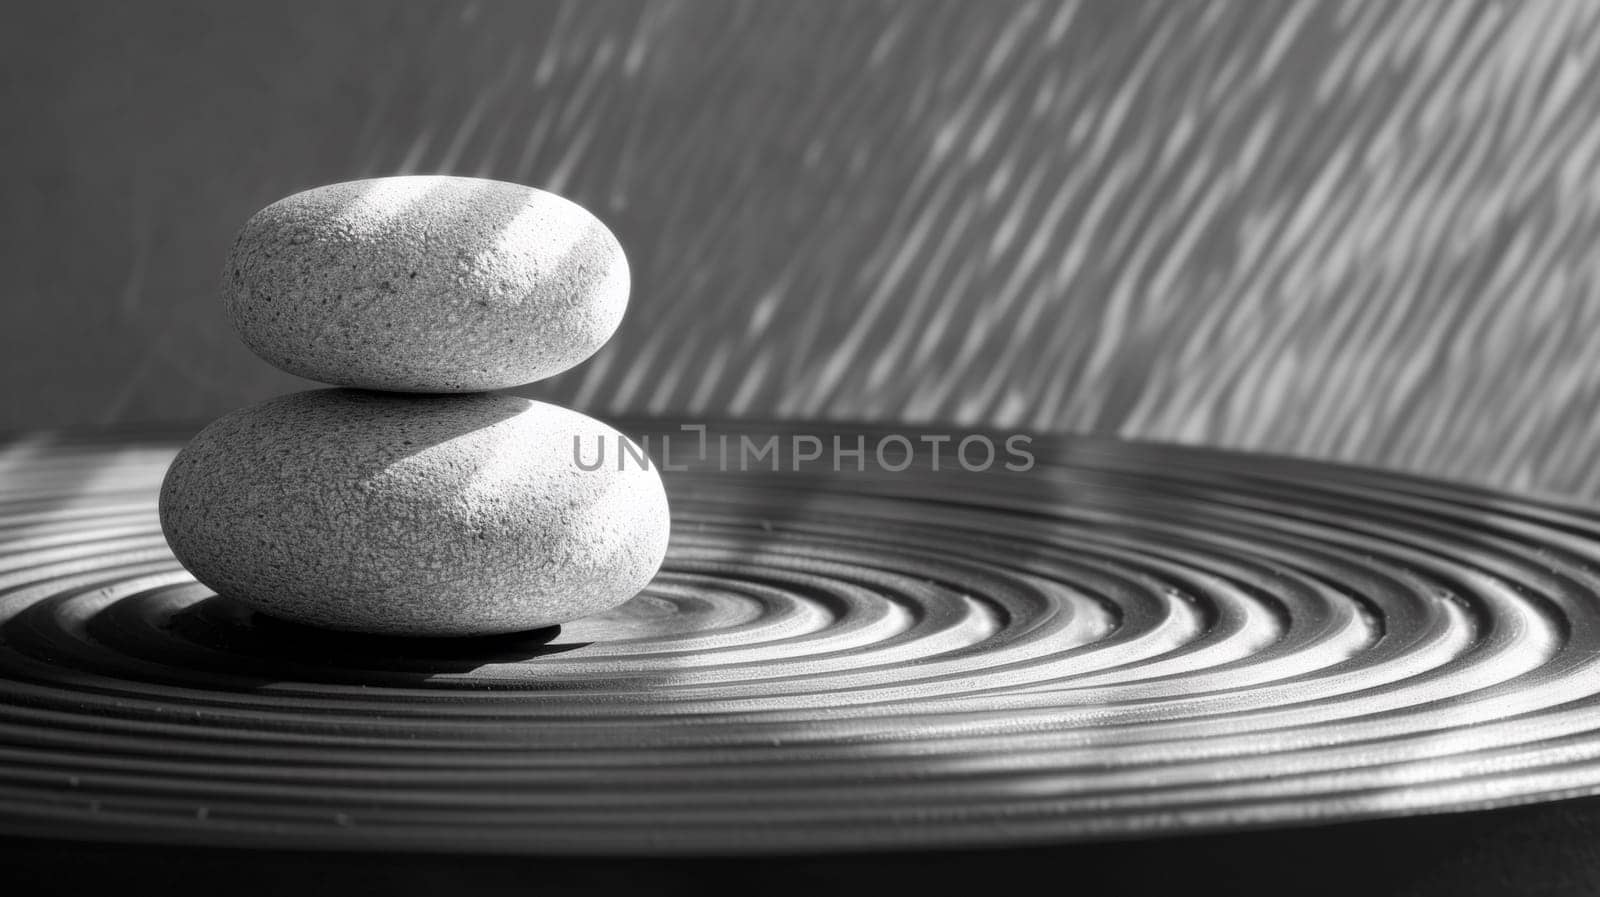 A black and white photo of two rocks sitting on top of a circular table